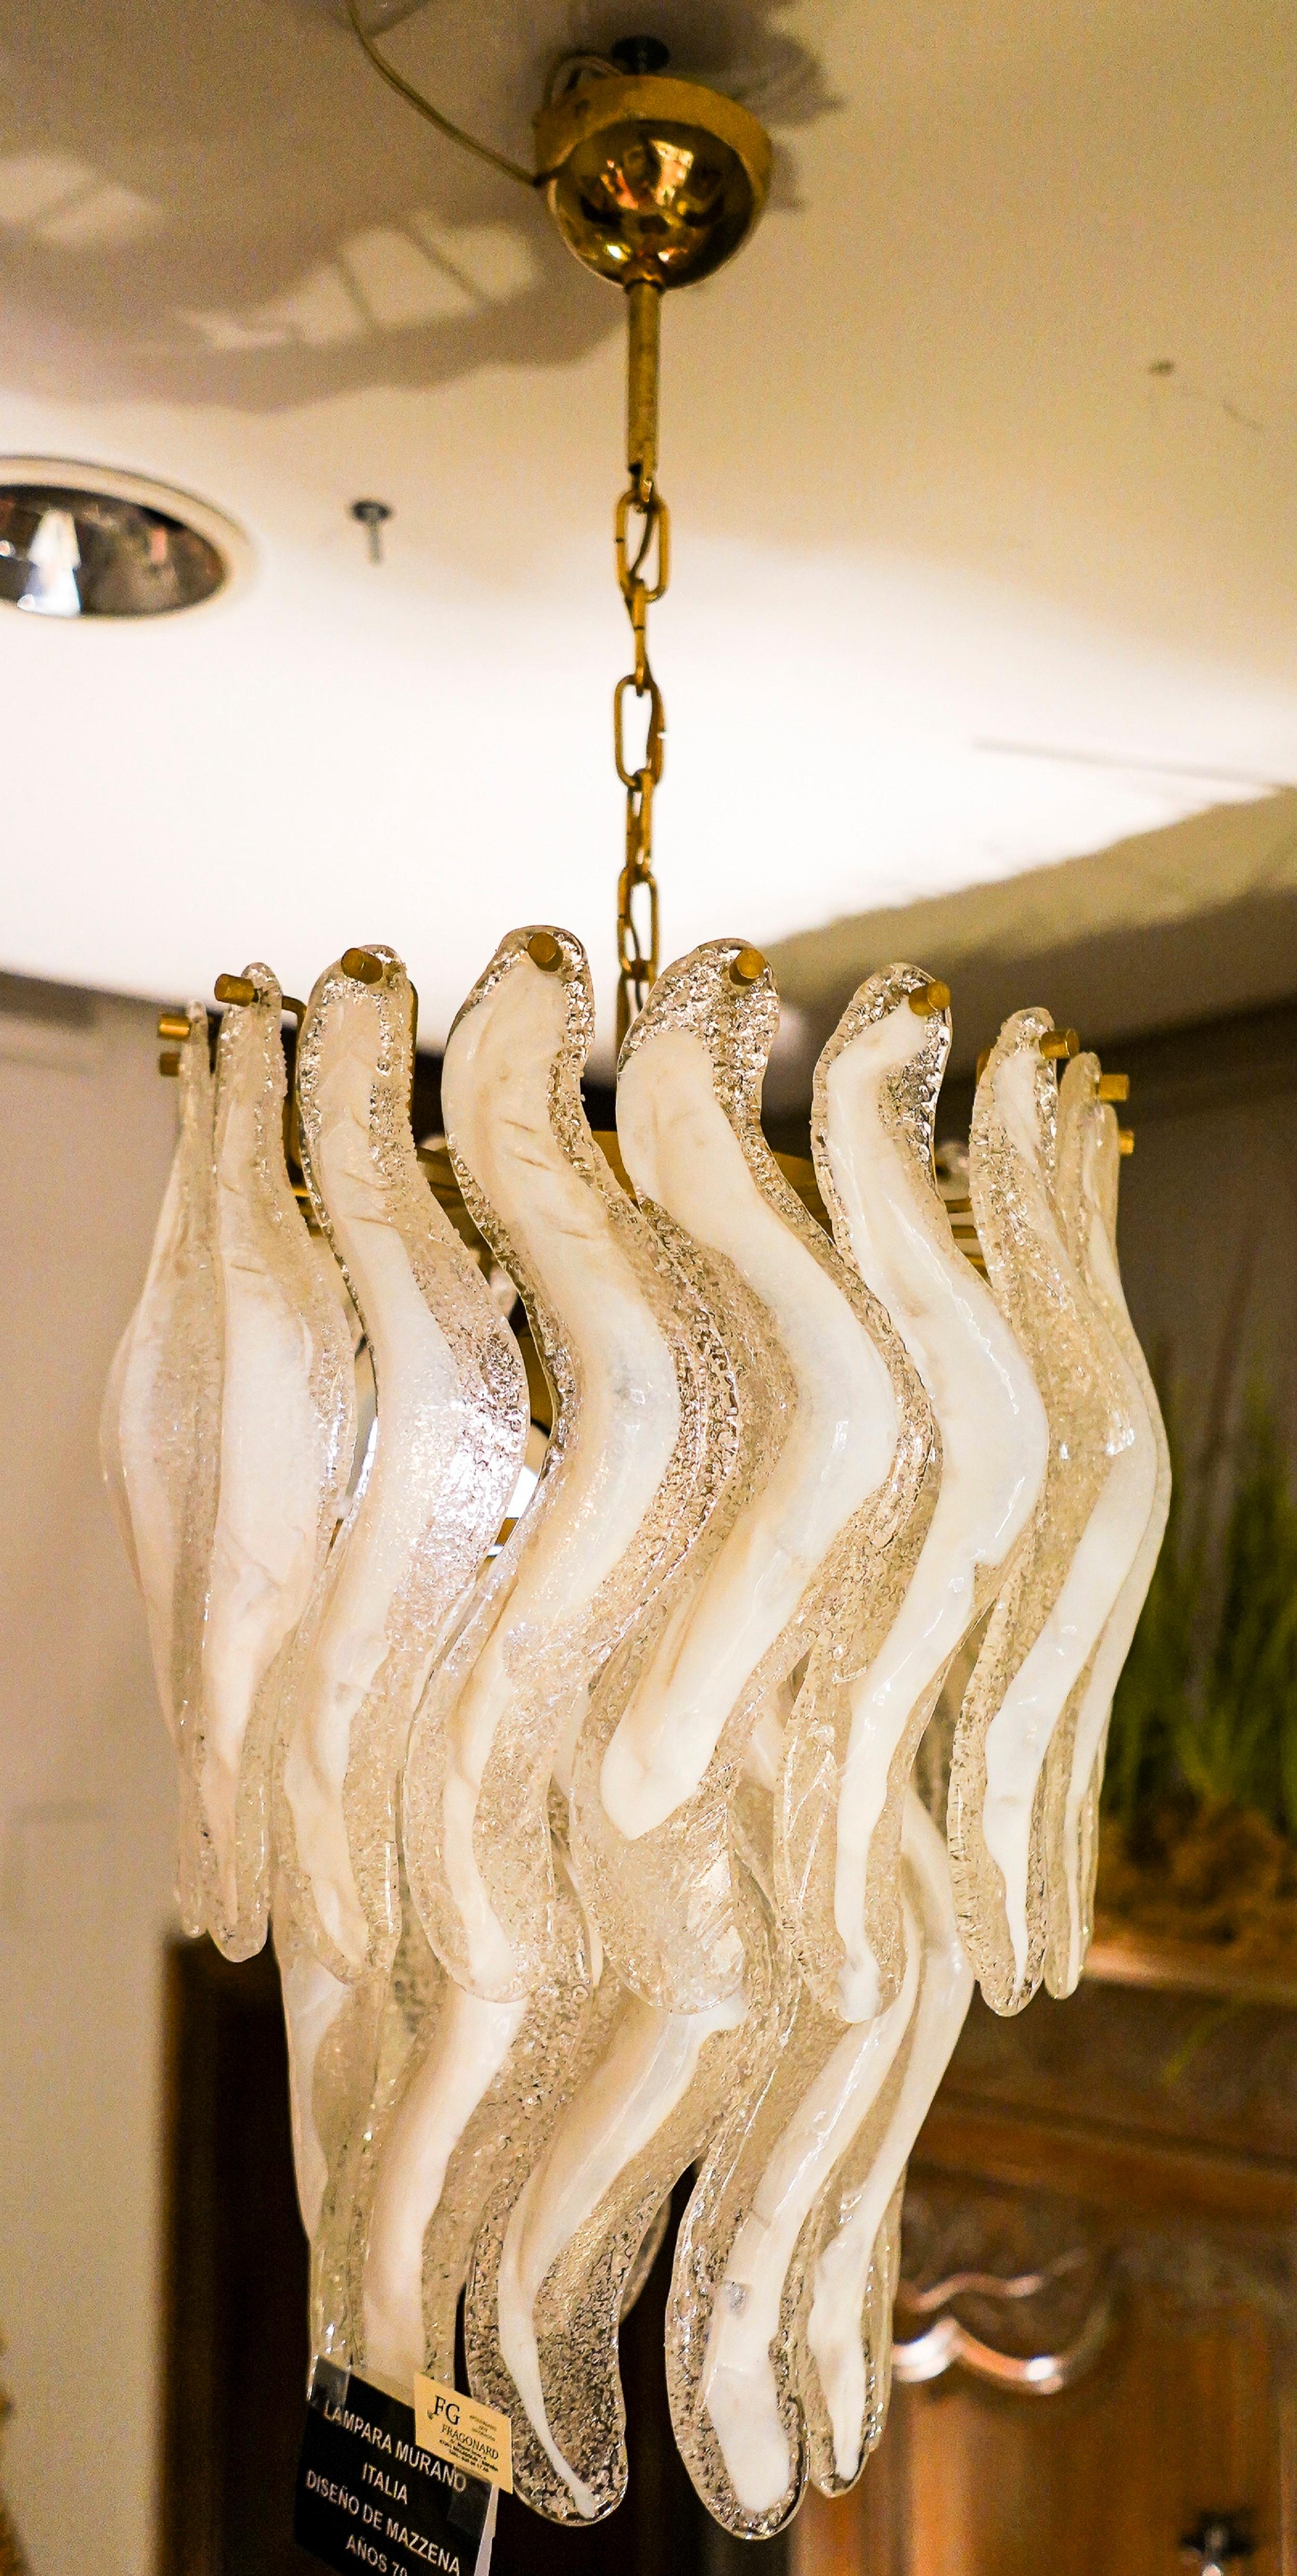 Exquisite 1970s, Italy Murano white crystal chandelier by Mazzena with frozen effect. In a perfect condition. Beautiful don't matter where its placed, unique. Its a touch of  exquisite freshness anywhere
The price includes a special wooden box or